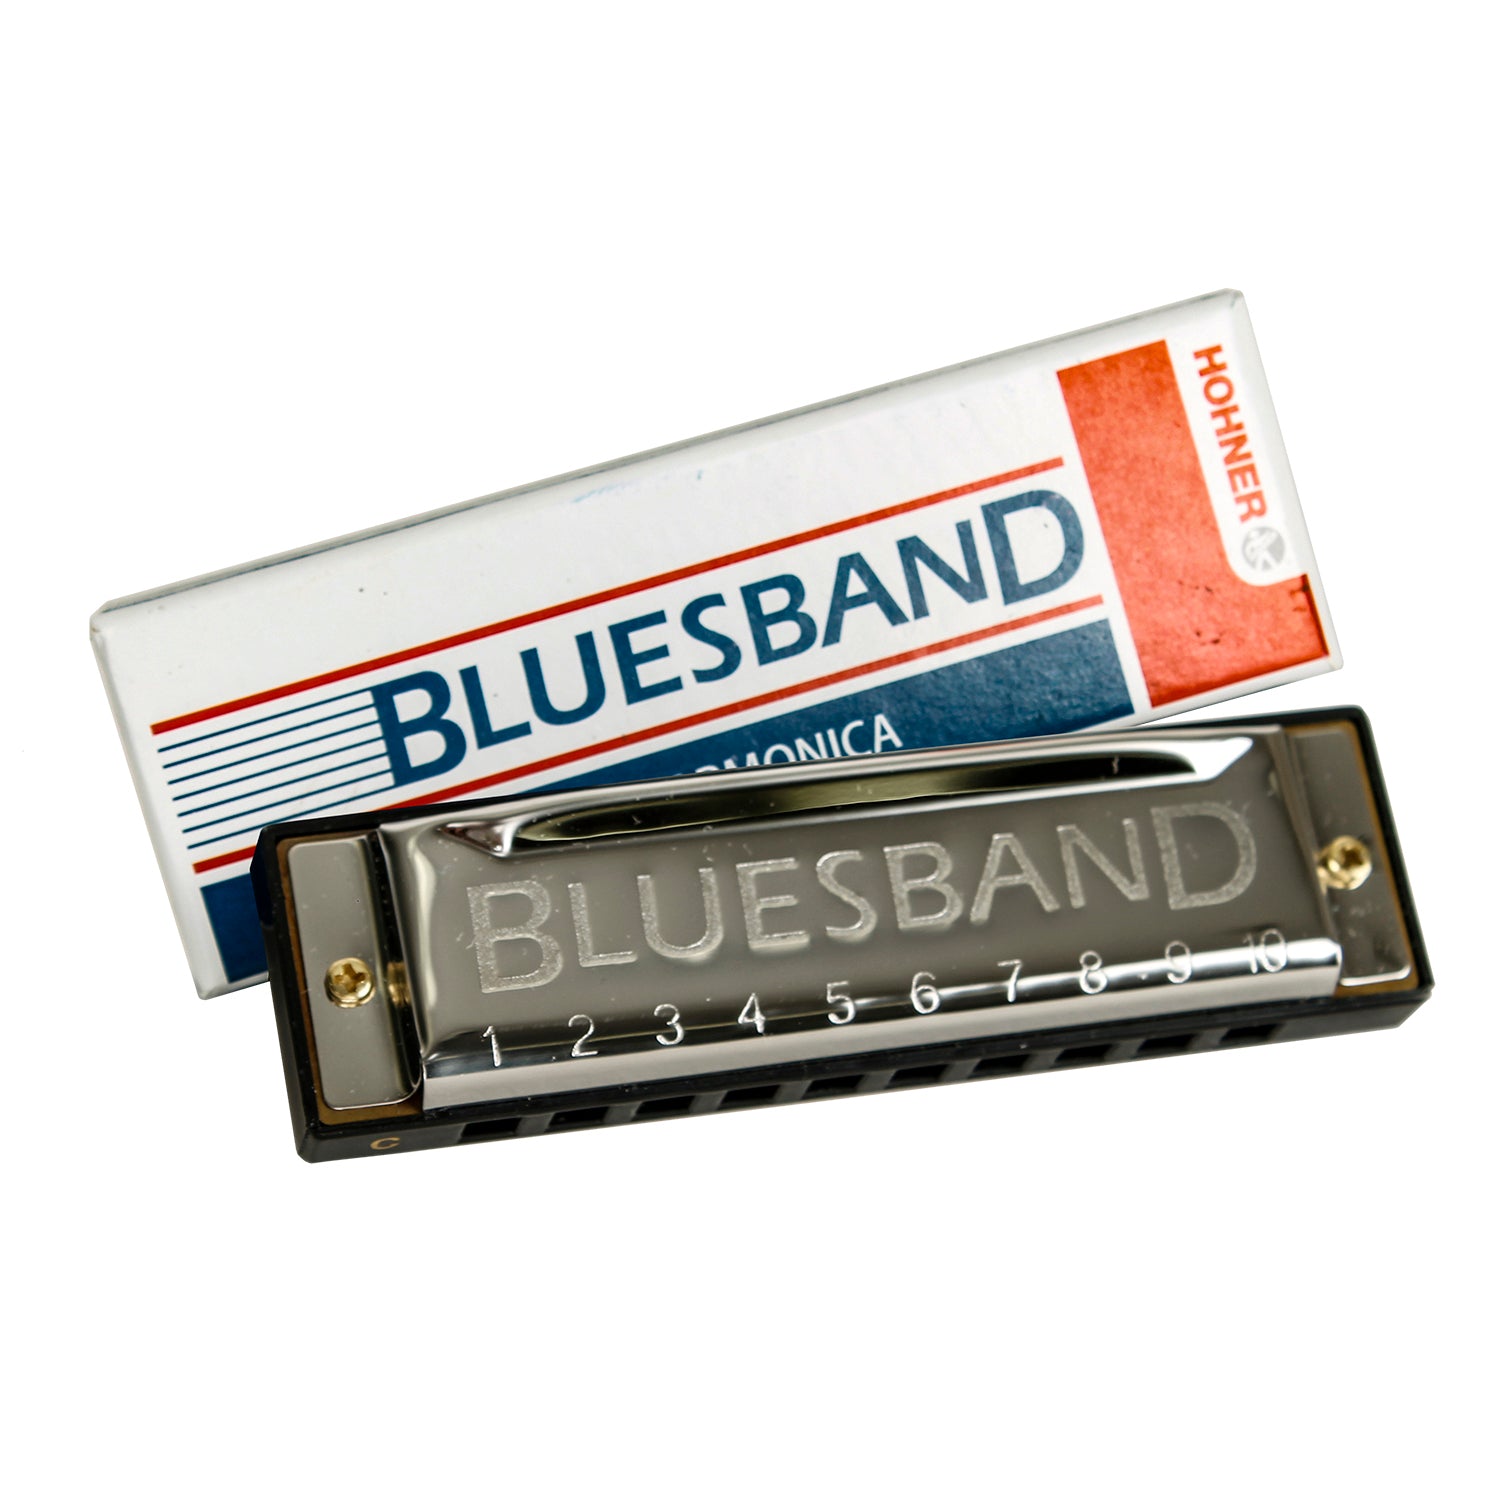 Blues Band Harmonica product with box